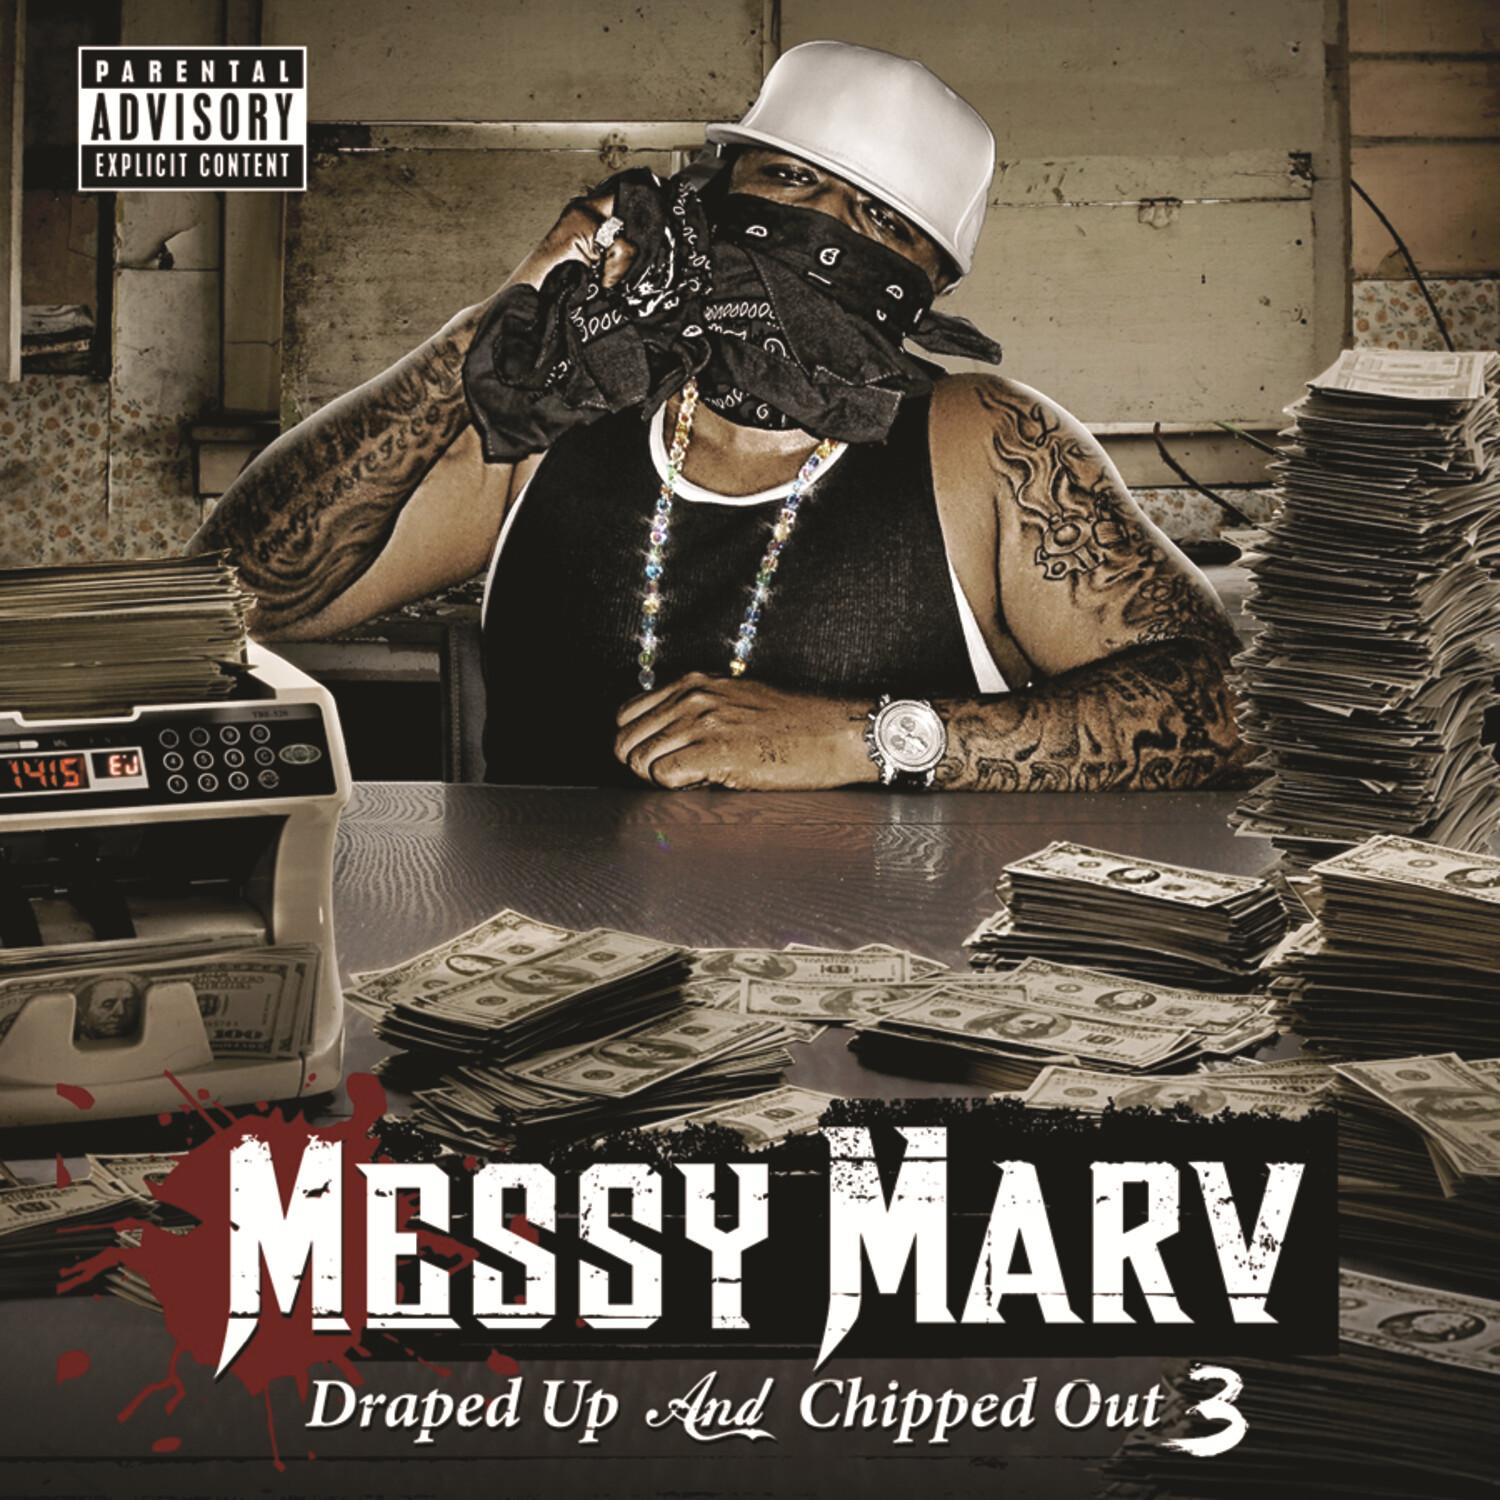 Messy Marv Presents Draped Up and Chipped Out III